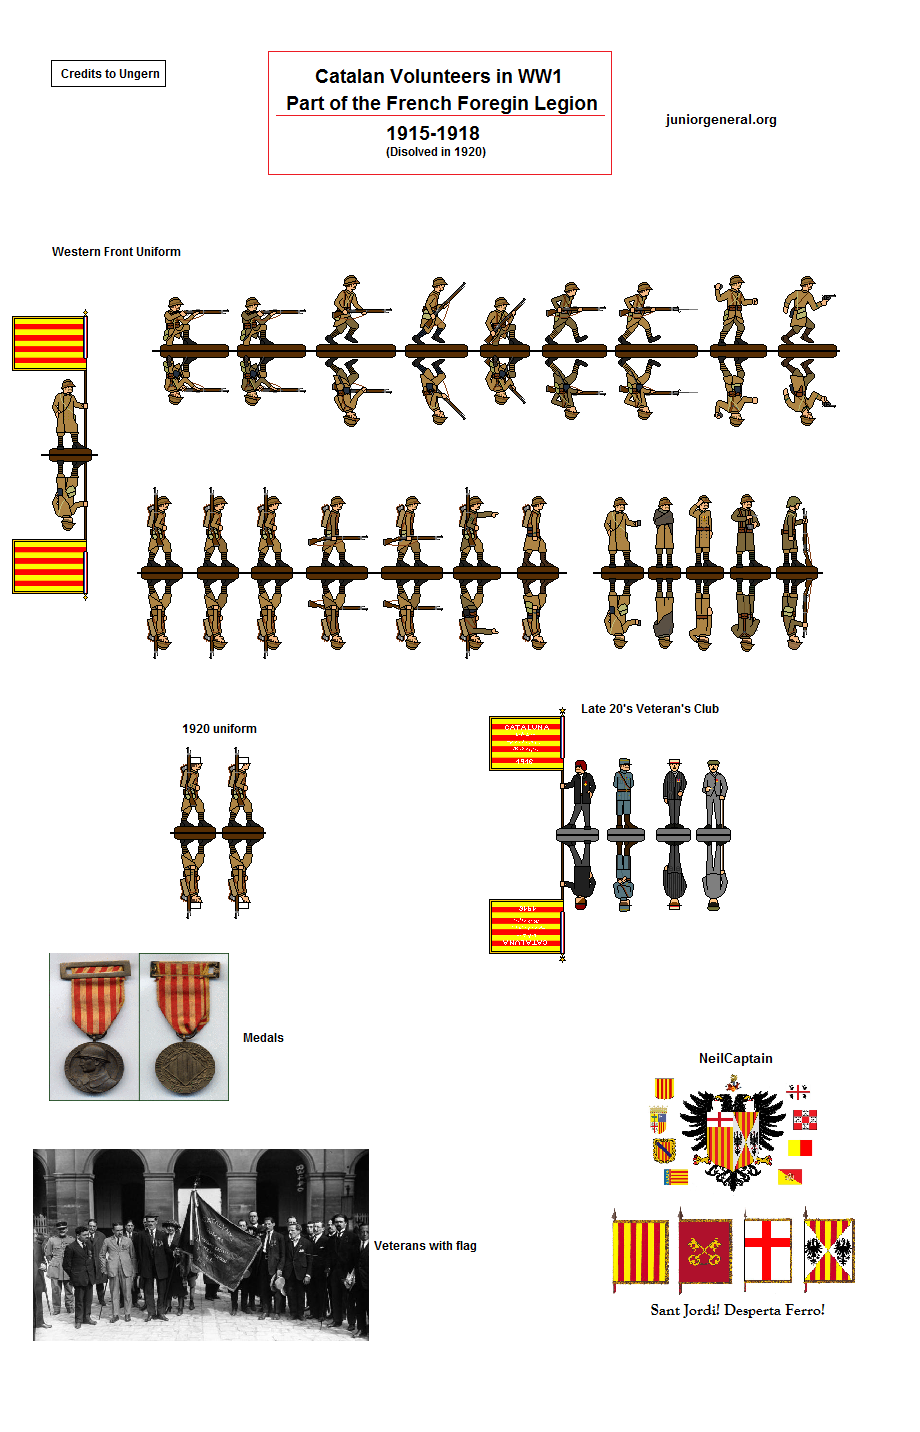 Catalan Volunteers (French Foreign Legion)